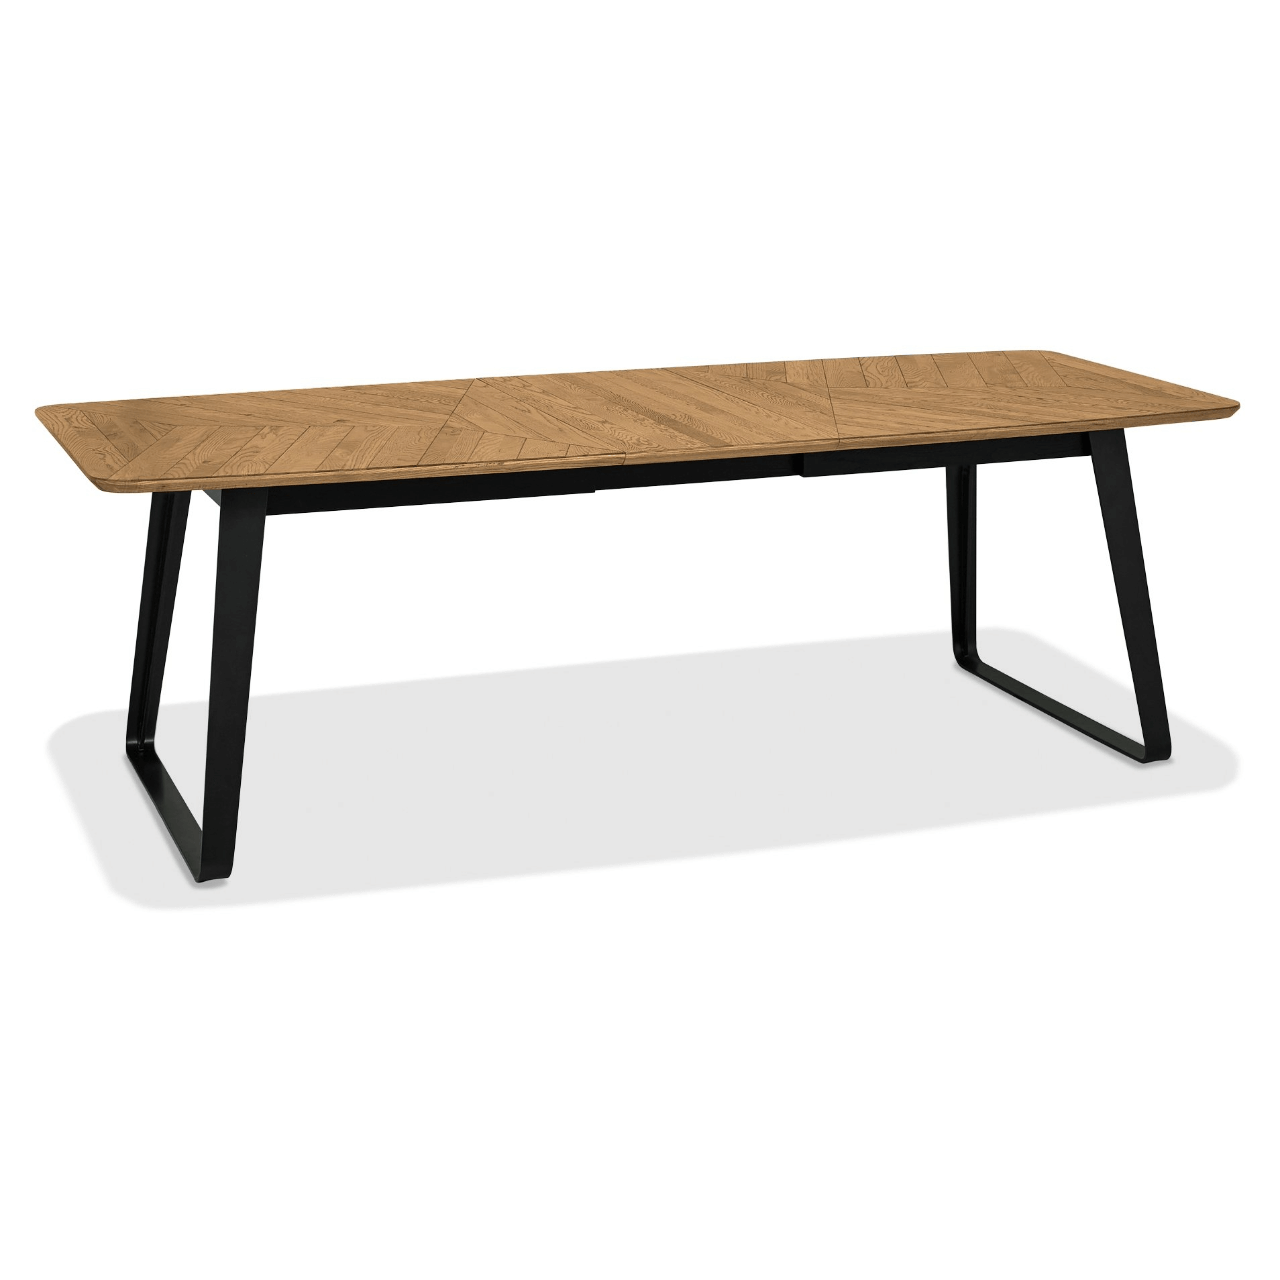 Emerson Rustic Oak & Peppercorn 6-8 Seater Extension Dining Table